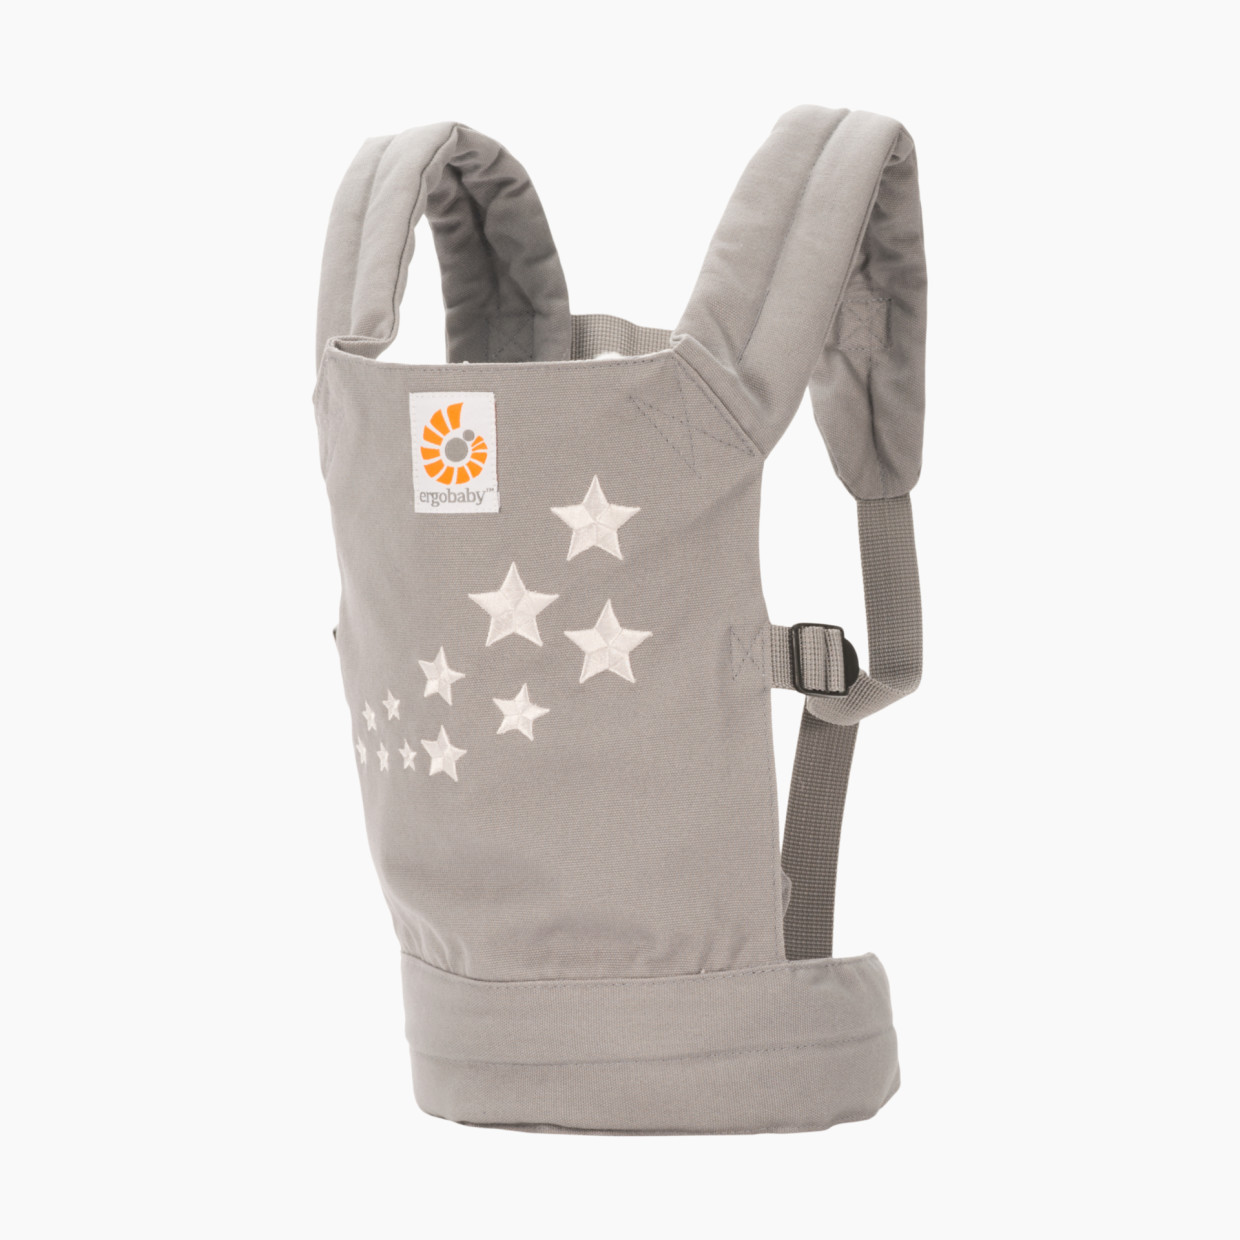 Ergobaby Doll Carrier for Toddler - Galaxy Grey.